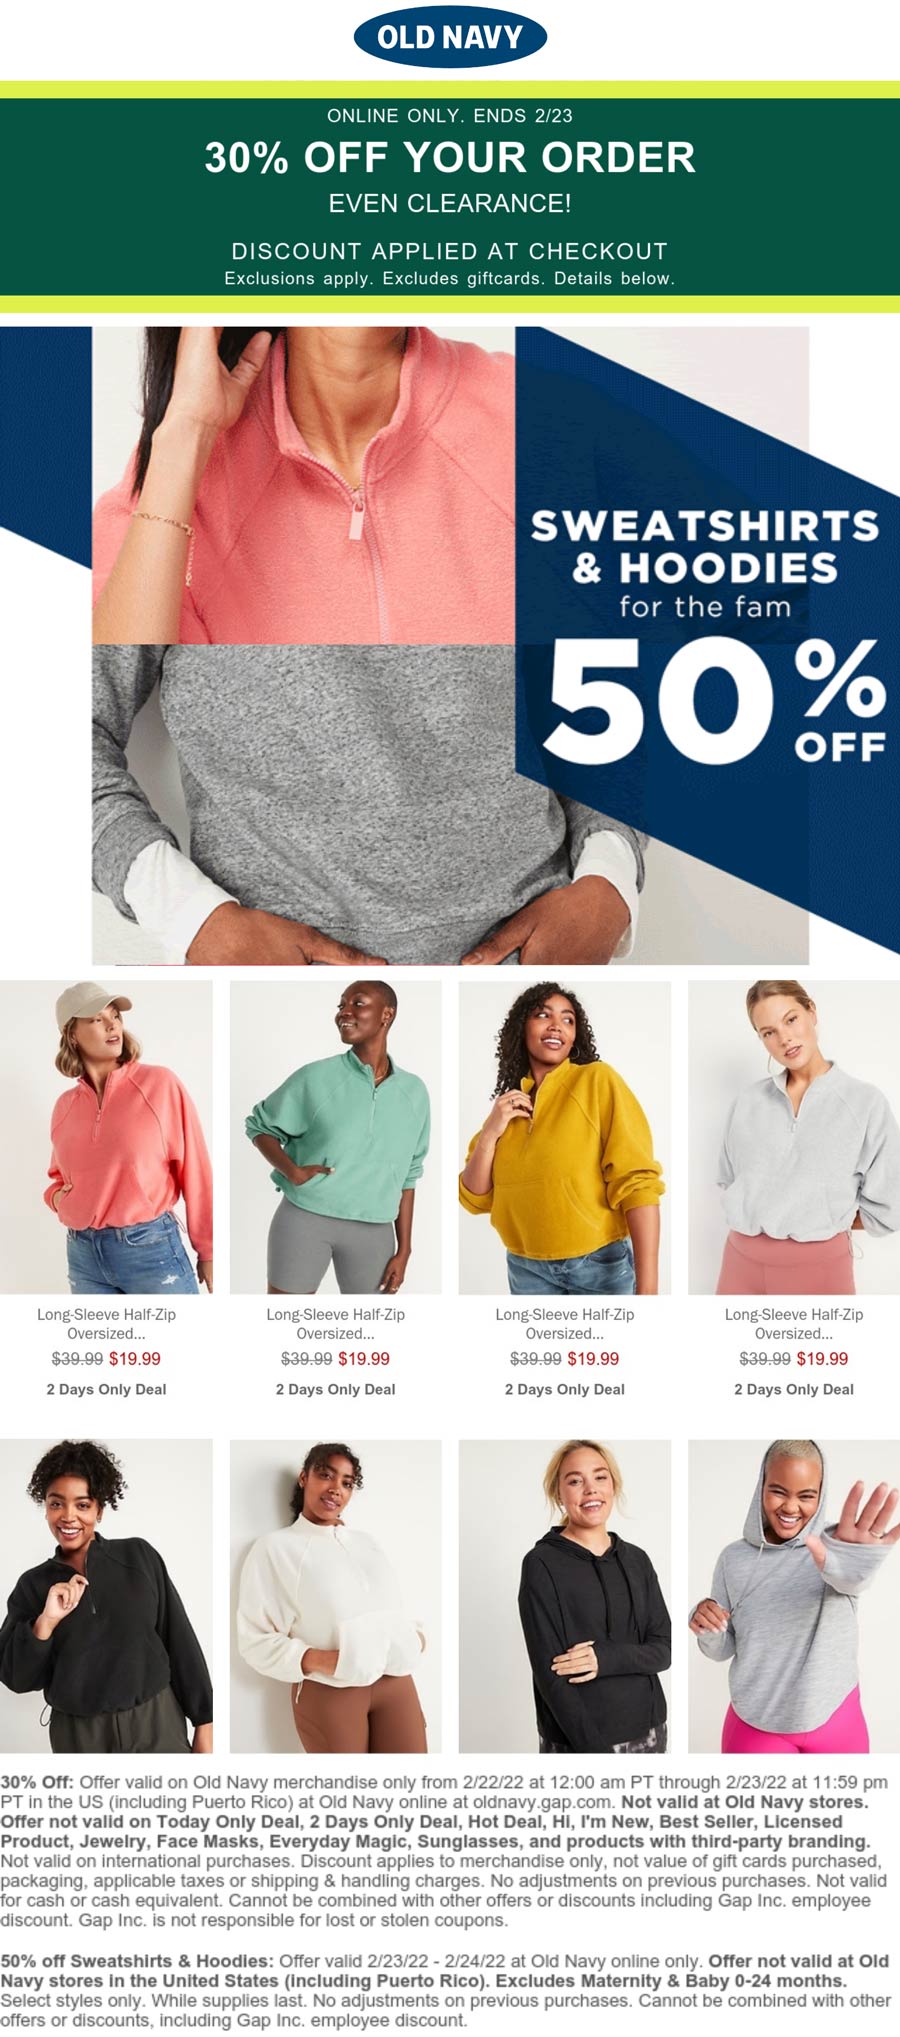 Old Navy stores Coupon  50% off hoodies & sweatshirts, 30% off the rest online at Old Navy #oldnavy 